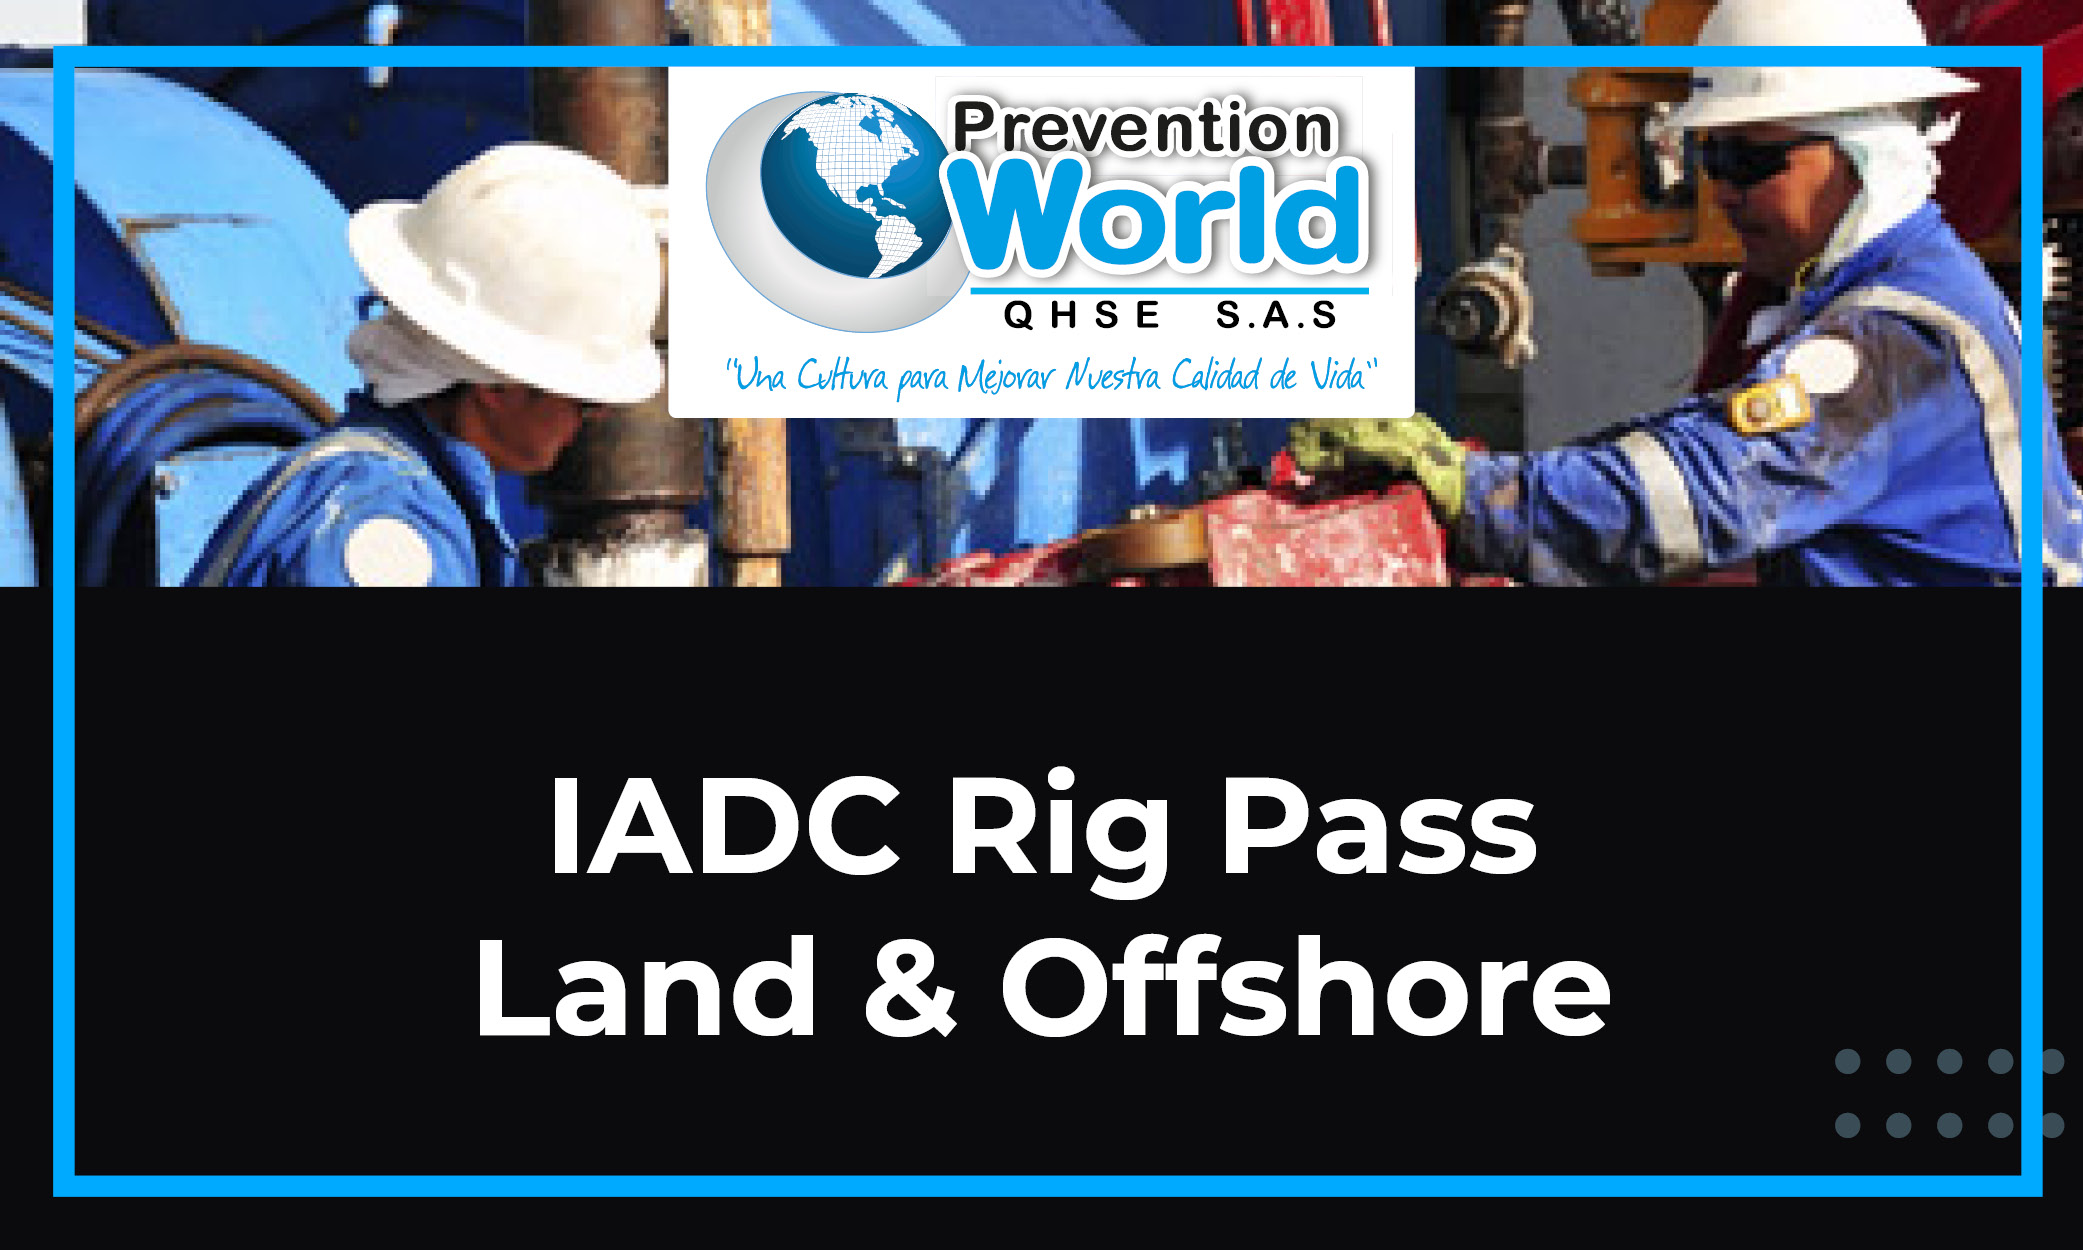 IADC Rig Pass - Land & Offshore